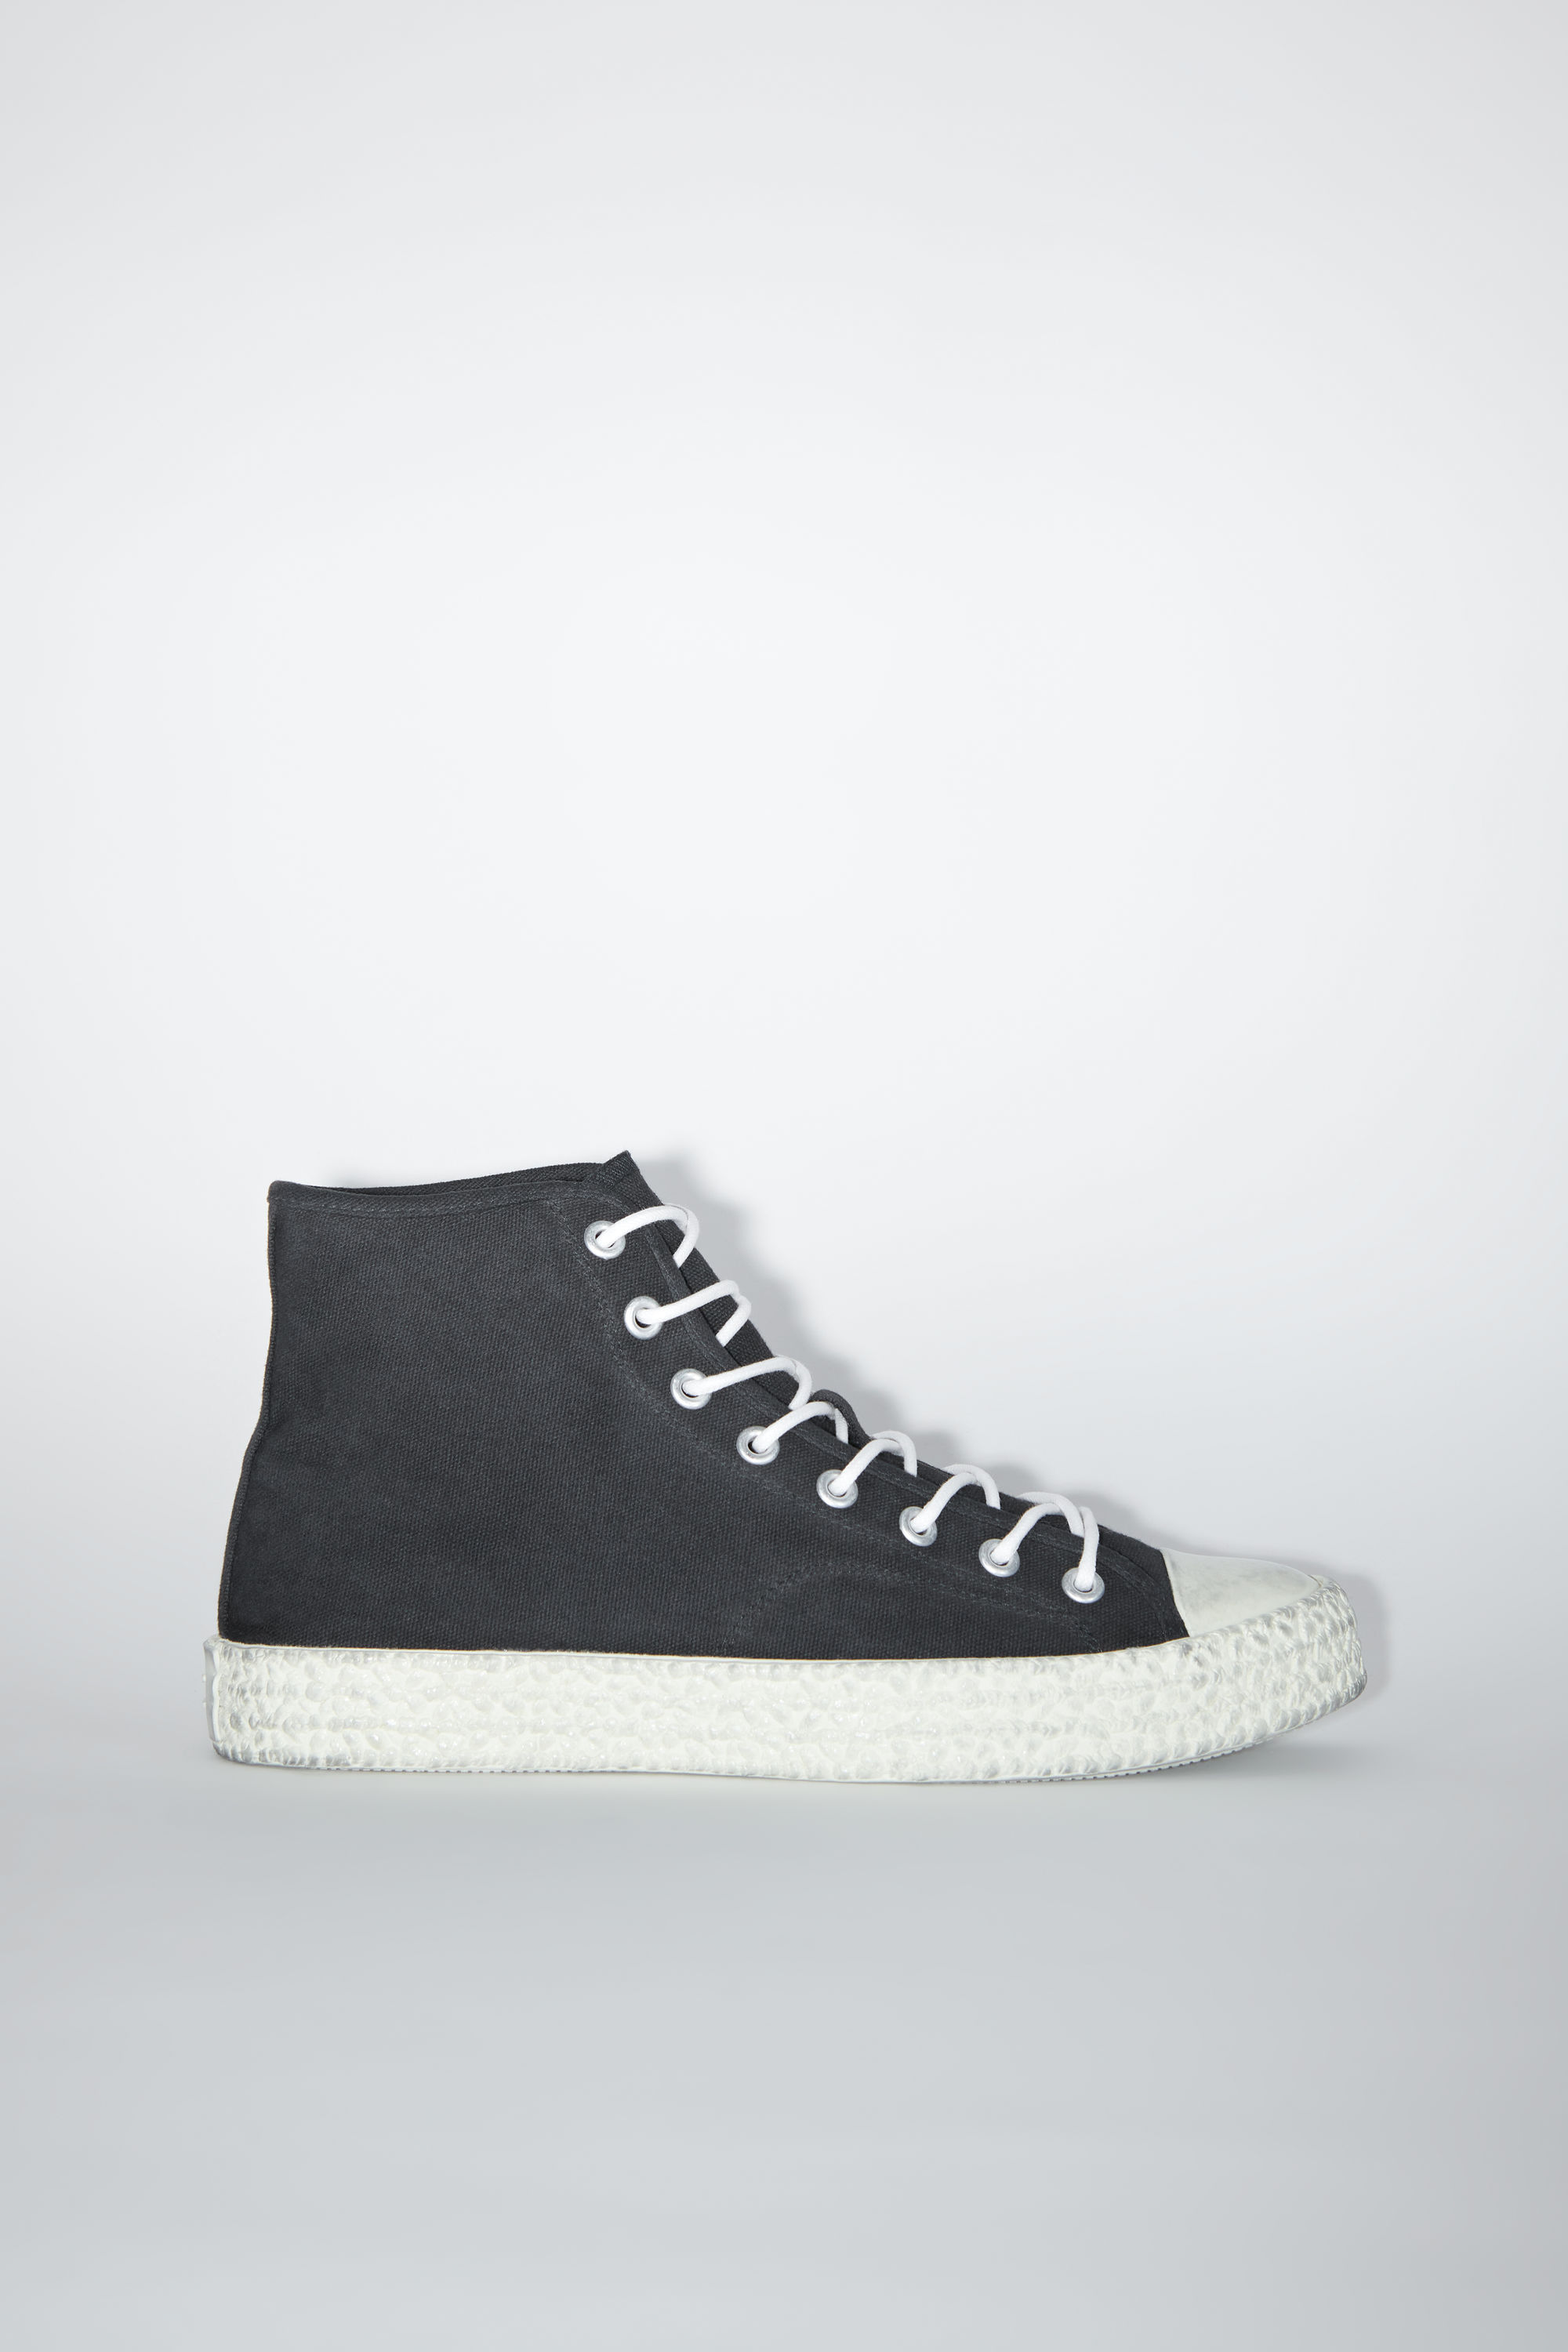 ACNE STUDIOS ACNE STUDIOS BALLOW HIGH TUMBLED FACE M BLACK/OFF WHITE HIGH TOP SNEAKERS